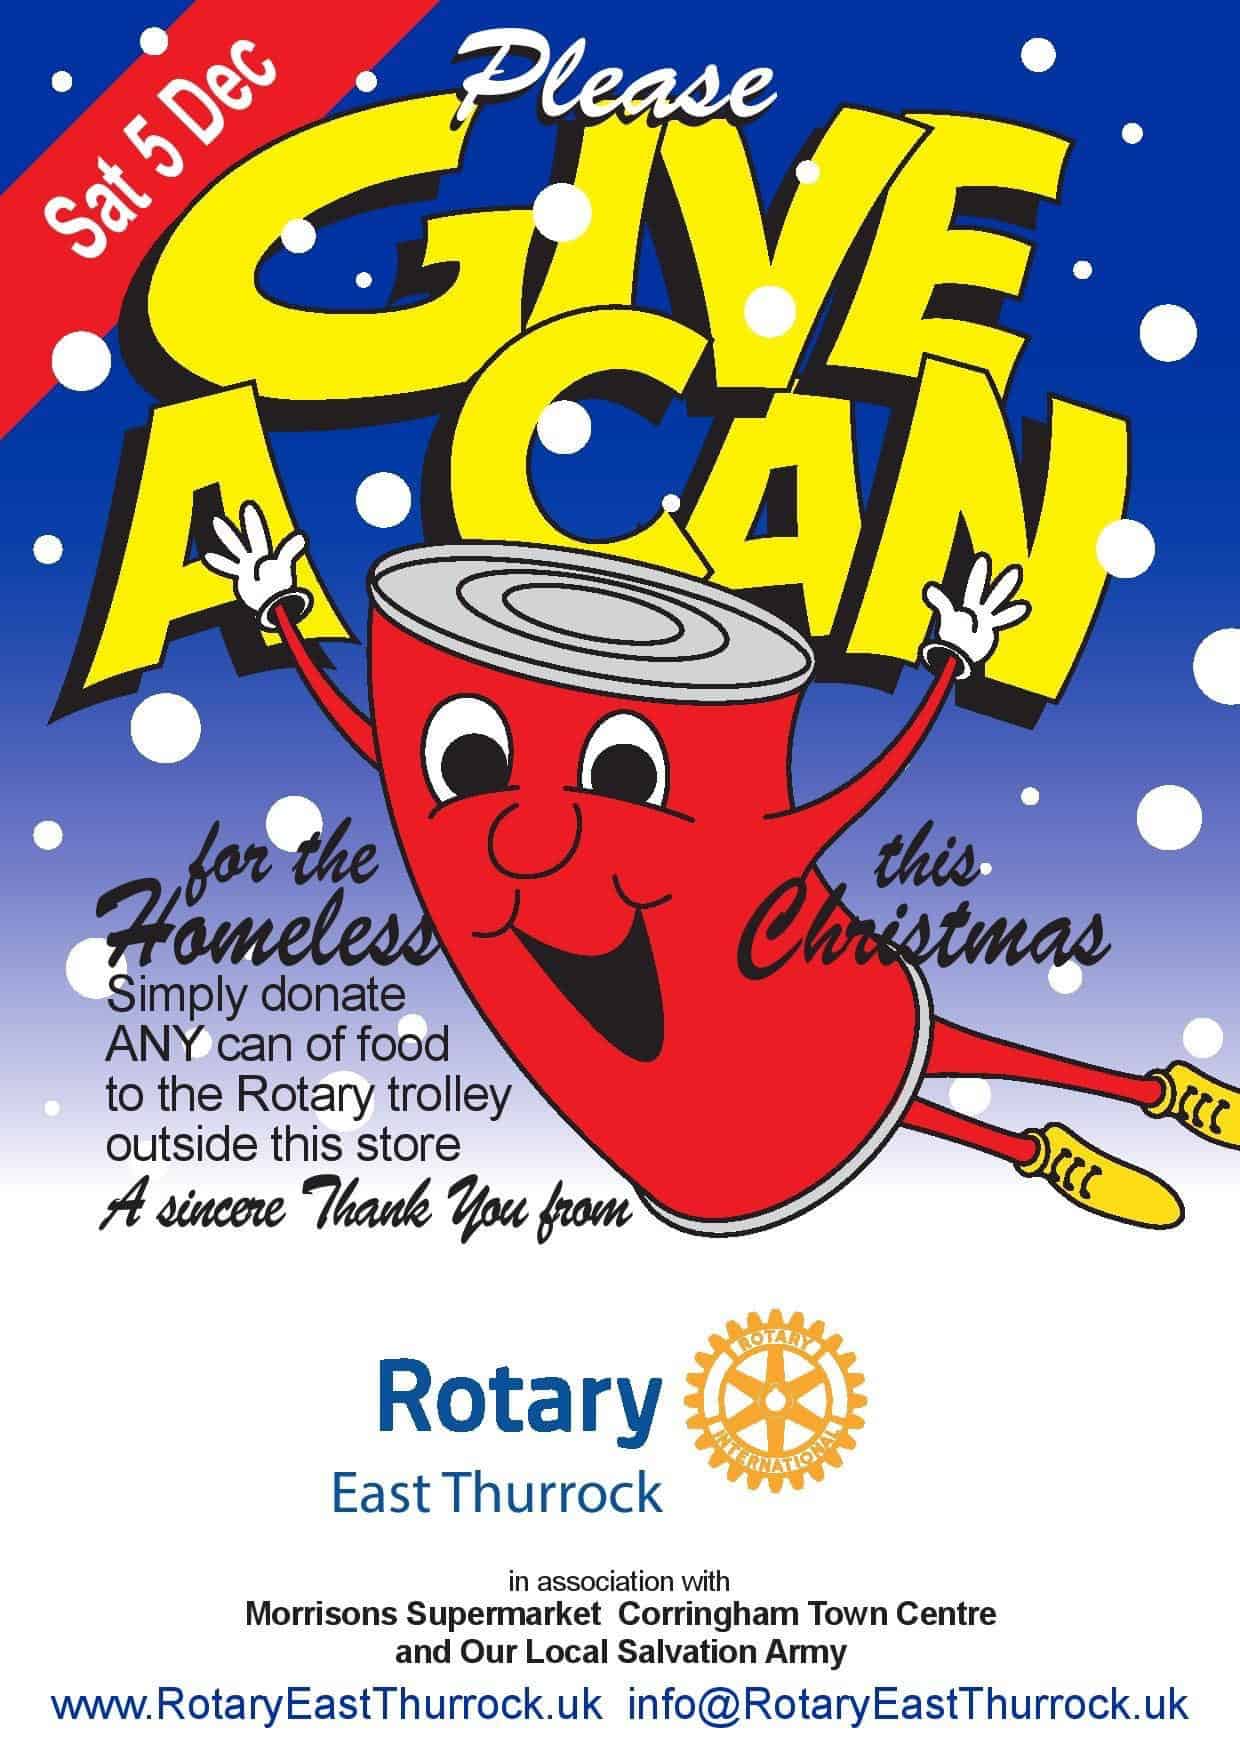 Featured image for “Rotary East Thurrock ‘Give A Can’ appeal”